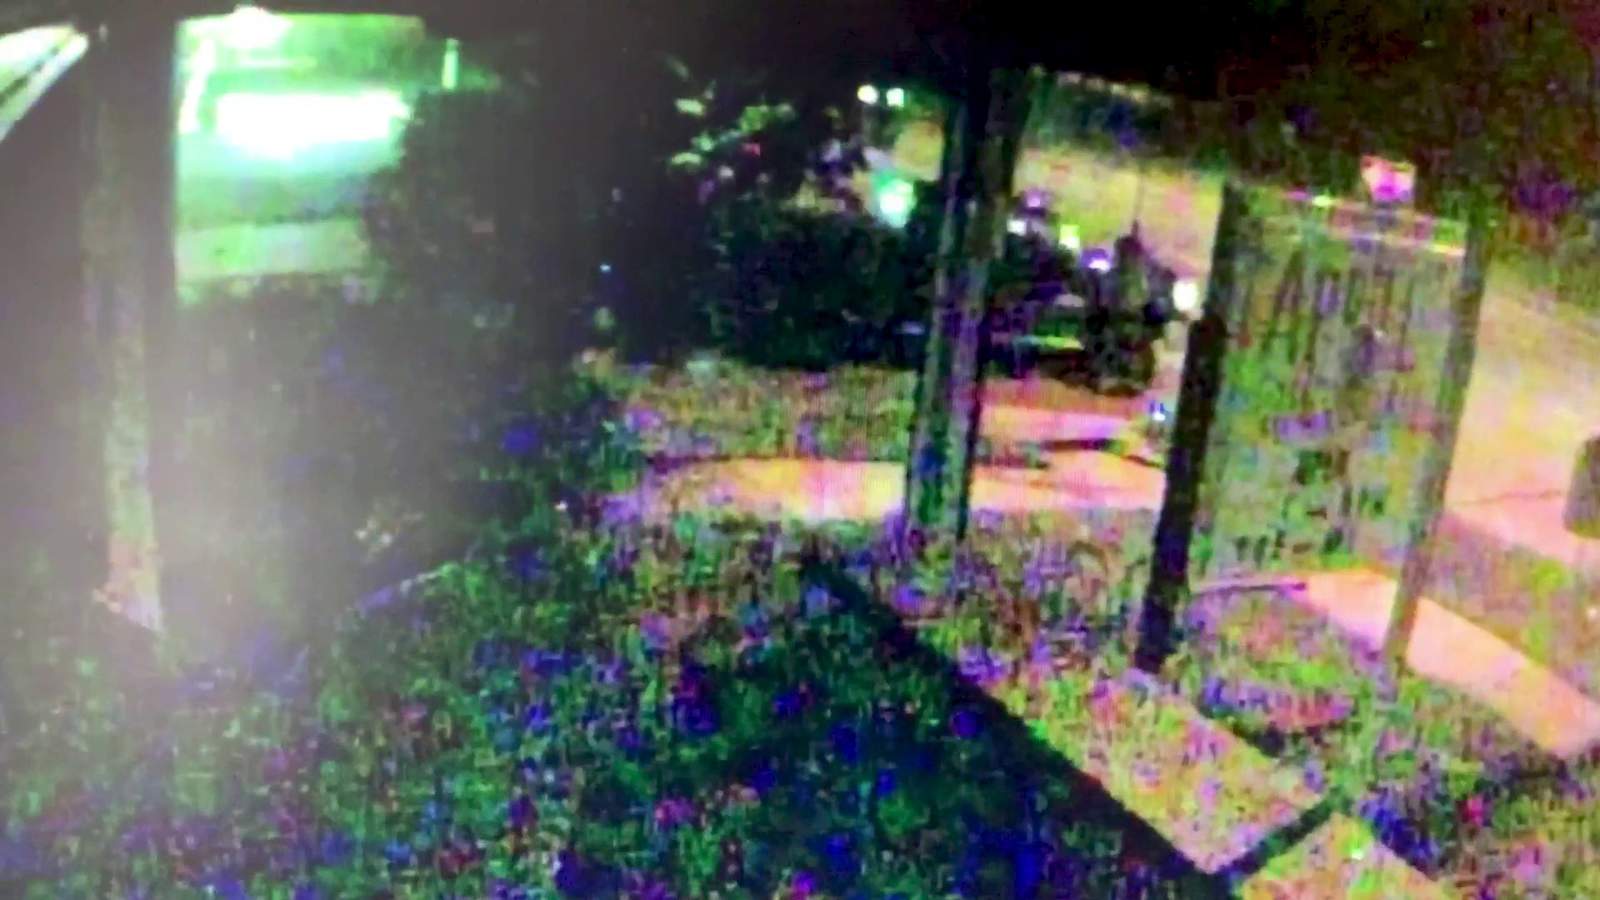 VIDEO: Police looking for driver in suspected vehicular assault in Pontiac